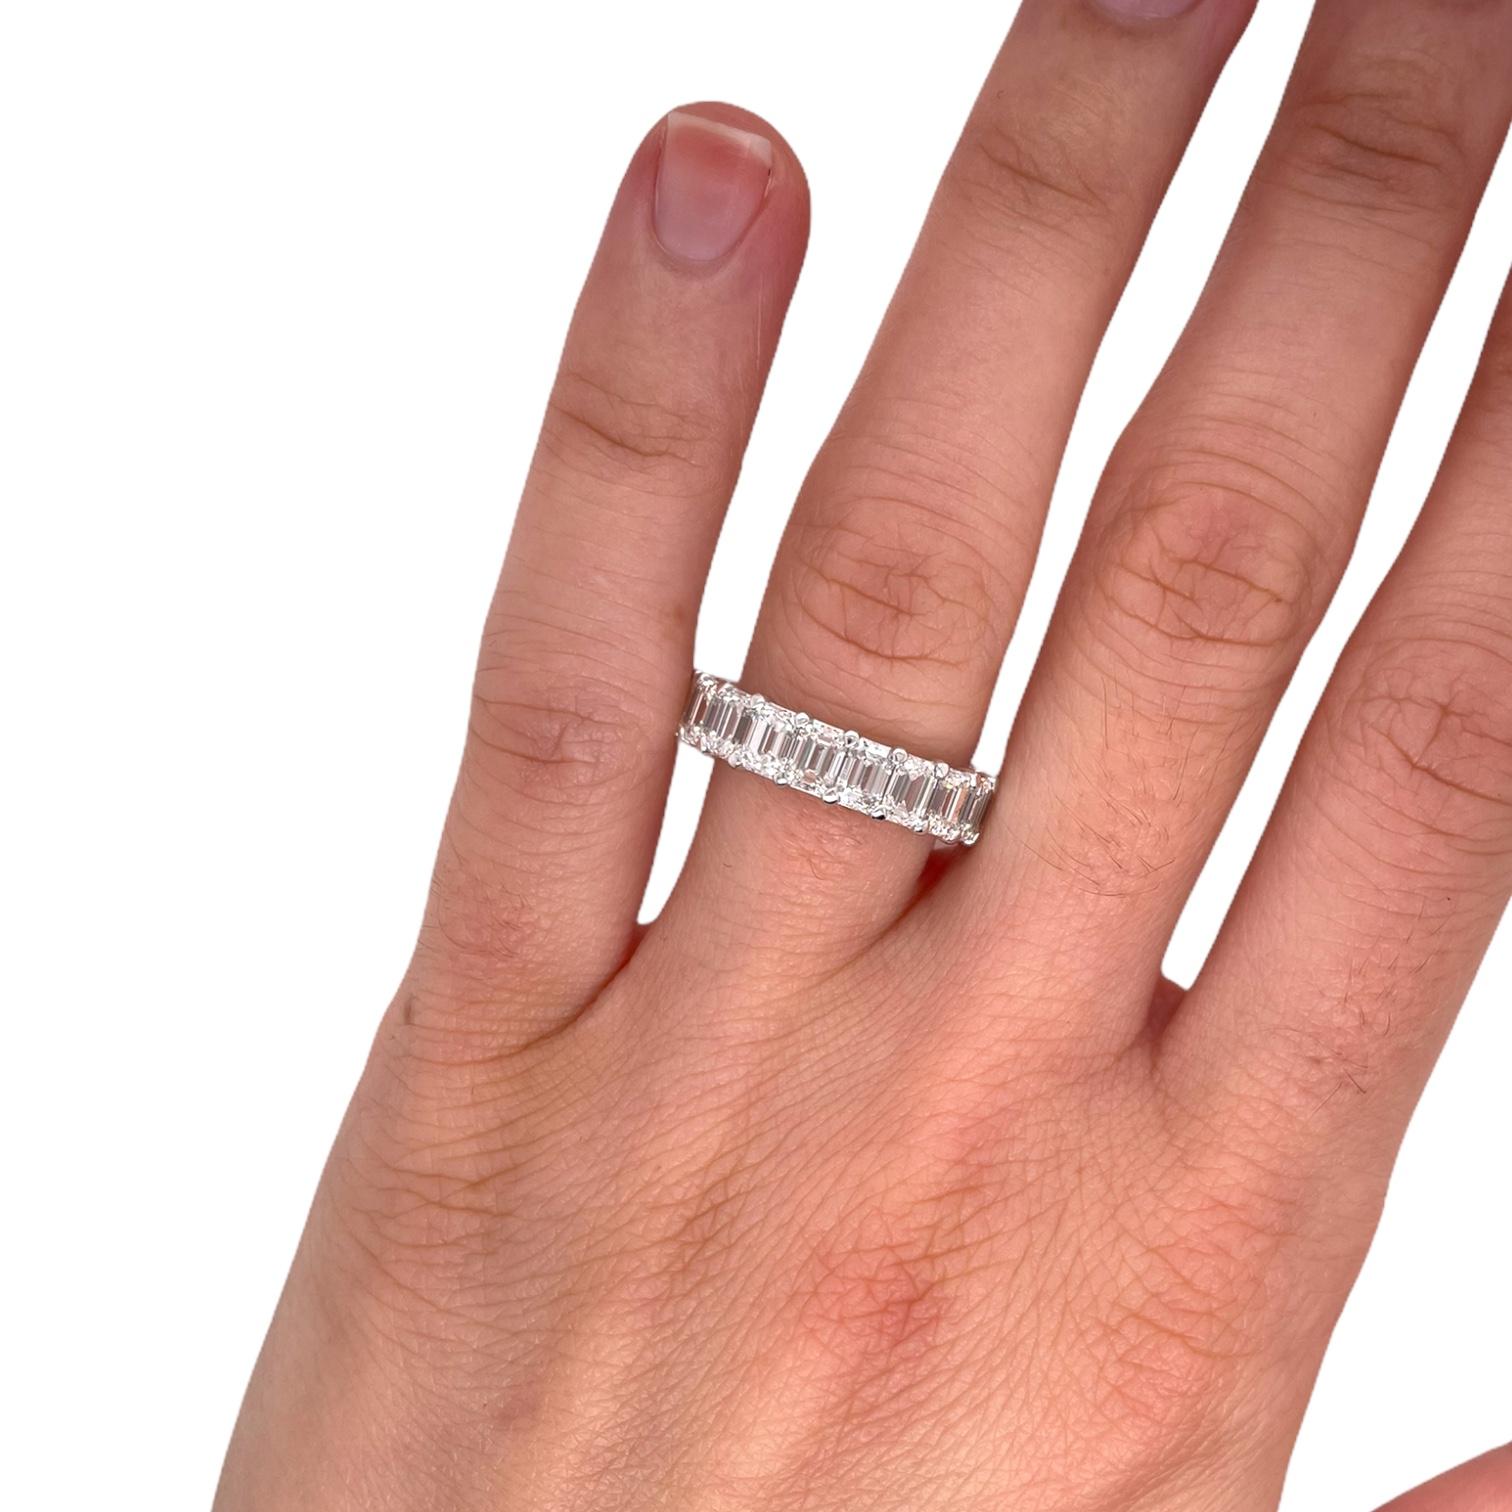 Ring contains 21 finely matched emerald cut diamonds, 5.58tcw. Diamonds are G in color and VS2 in clarity. All stones are mounted in a handmade basket prong setting in 18k white gold. Ring is a size 6. If different size is needed, please request